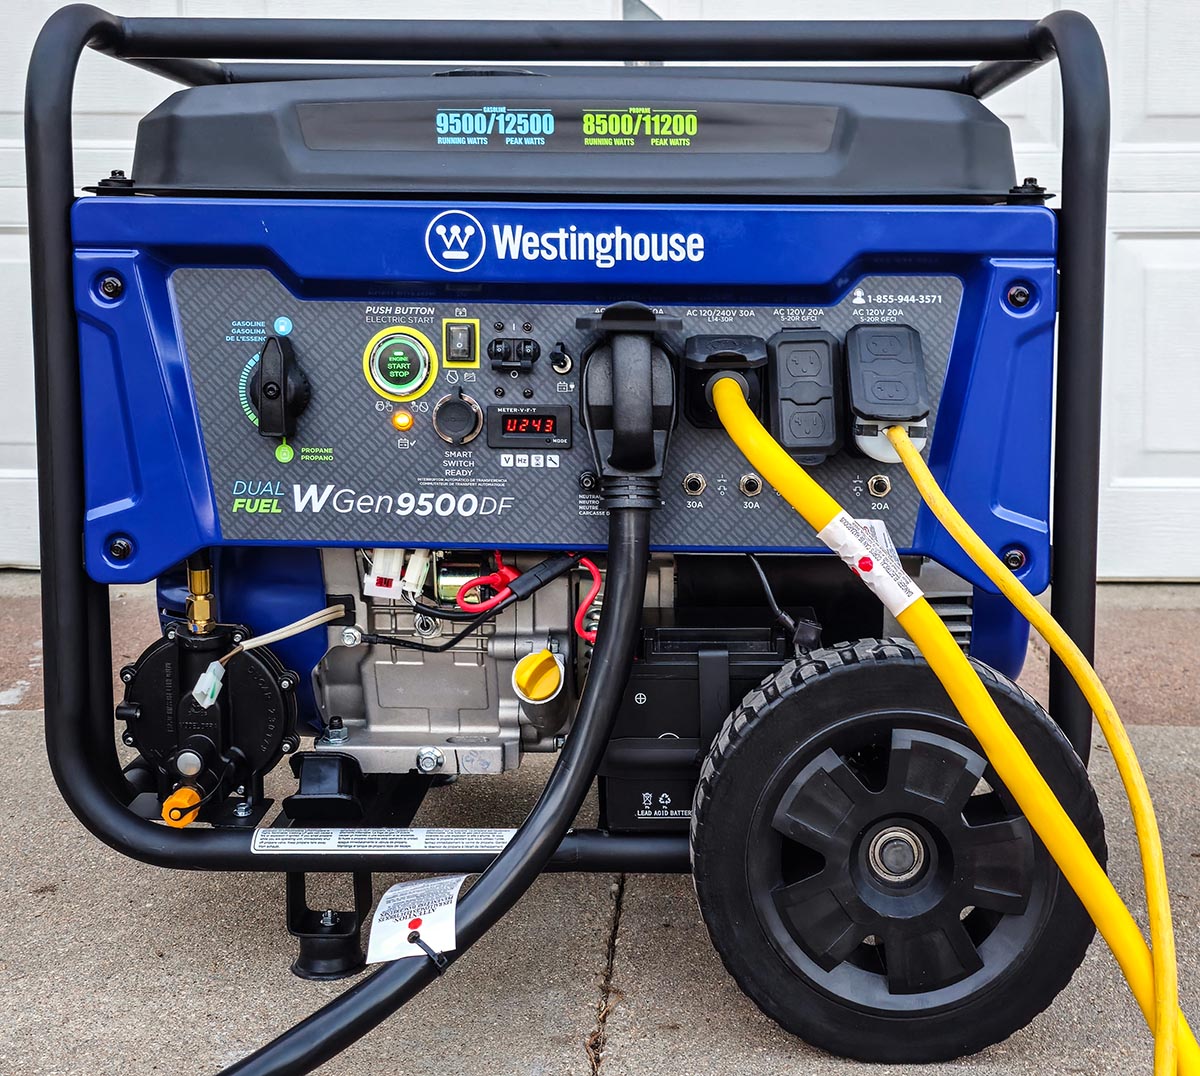 Westinghouse WGen9500DF Generator on concrete driveway with large cords plugged in.